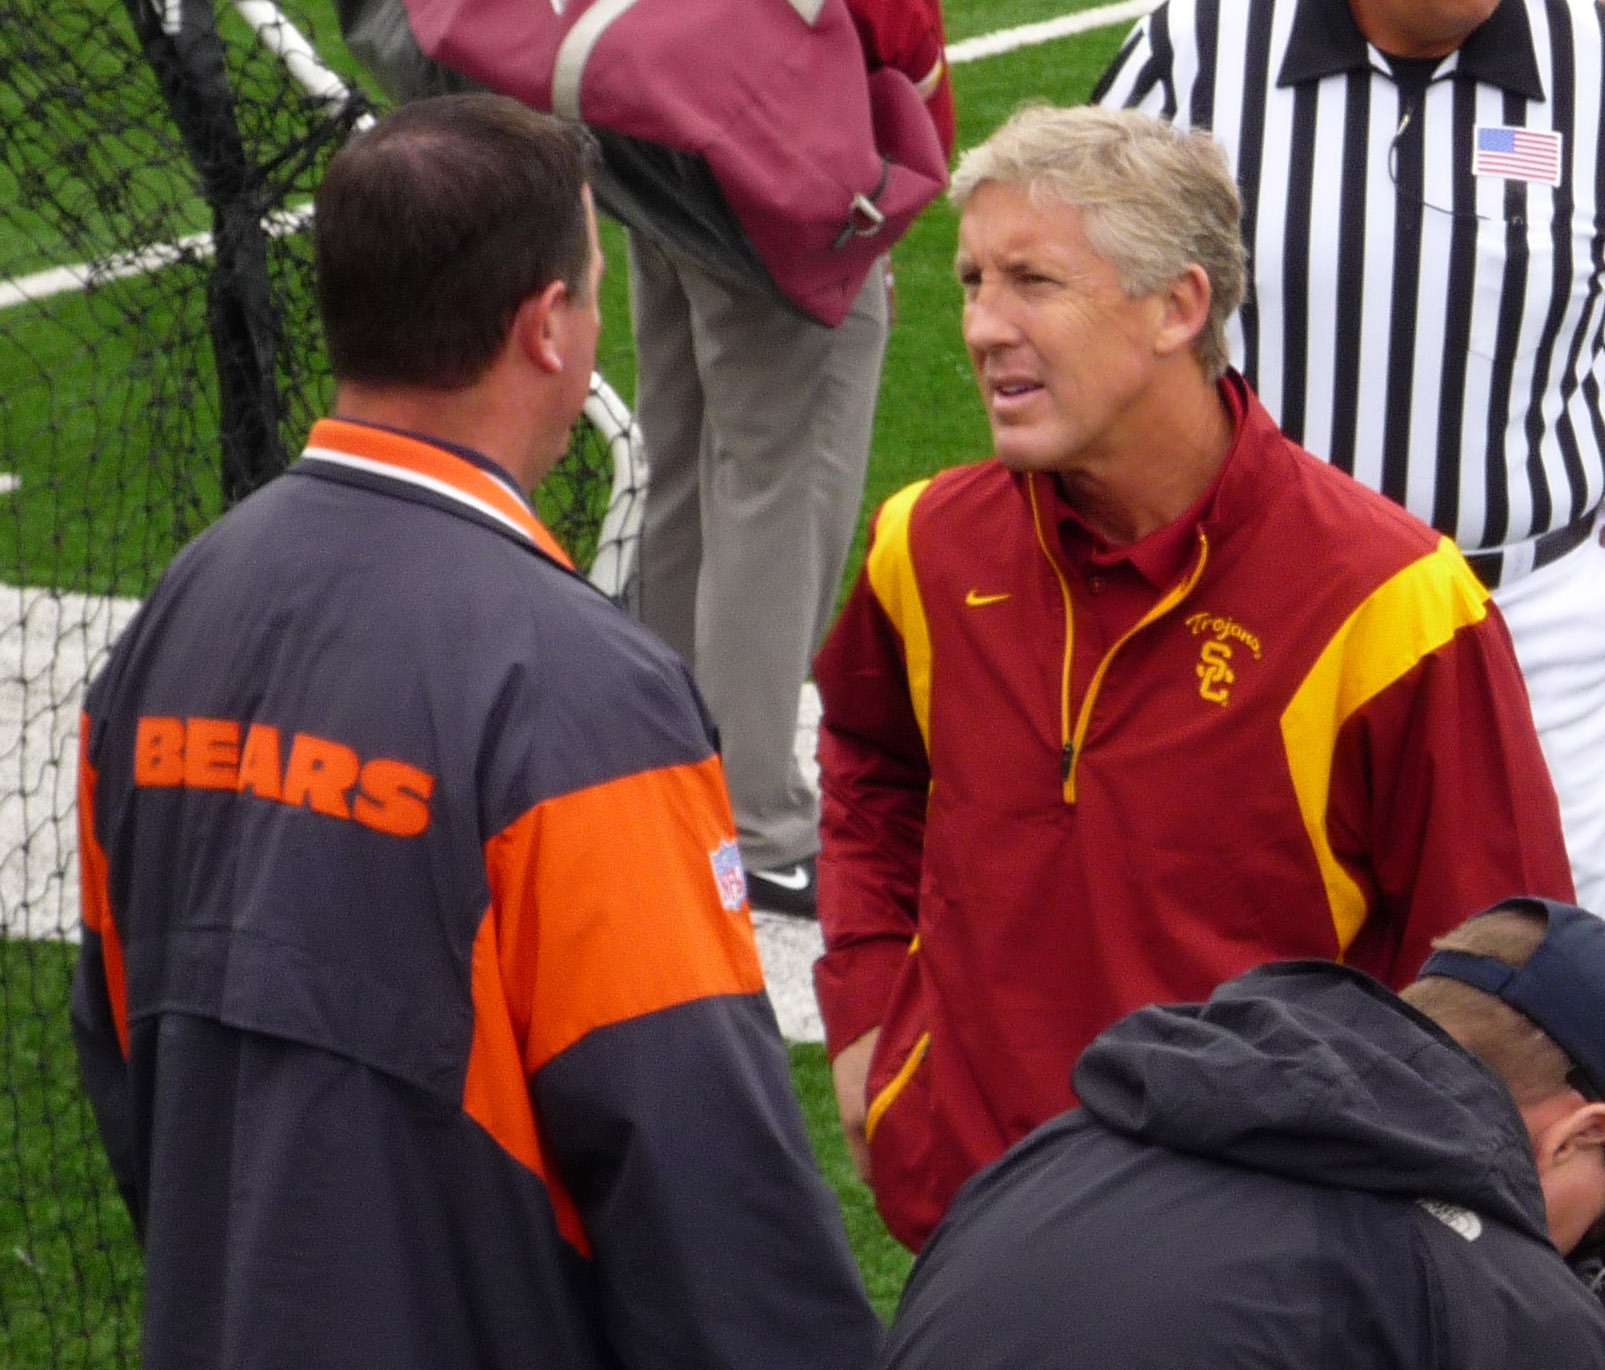 A tribute to Pete Carroll's timeless energy Daily Trojan